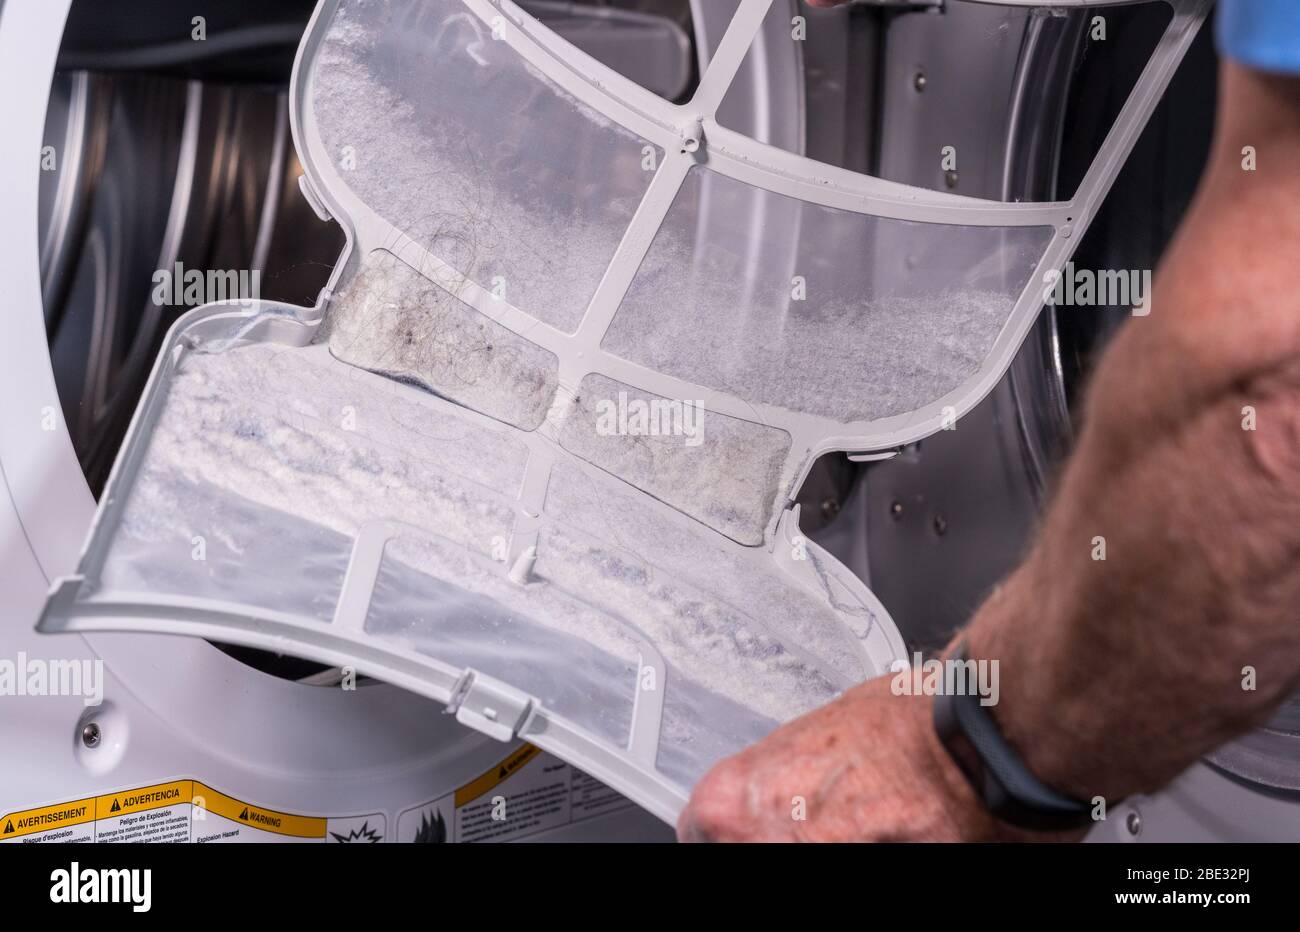 Senior caucasian man holding the lint filled trap from a front loading tumble dryer Stock Photo